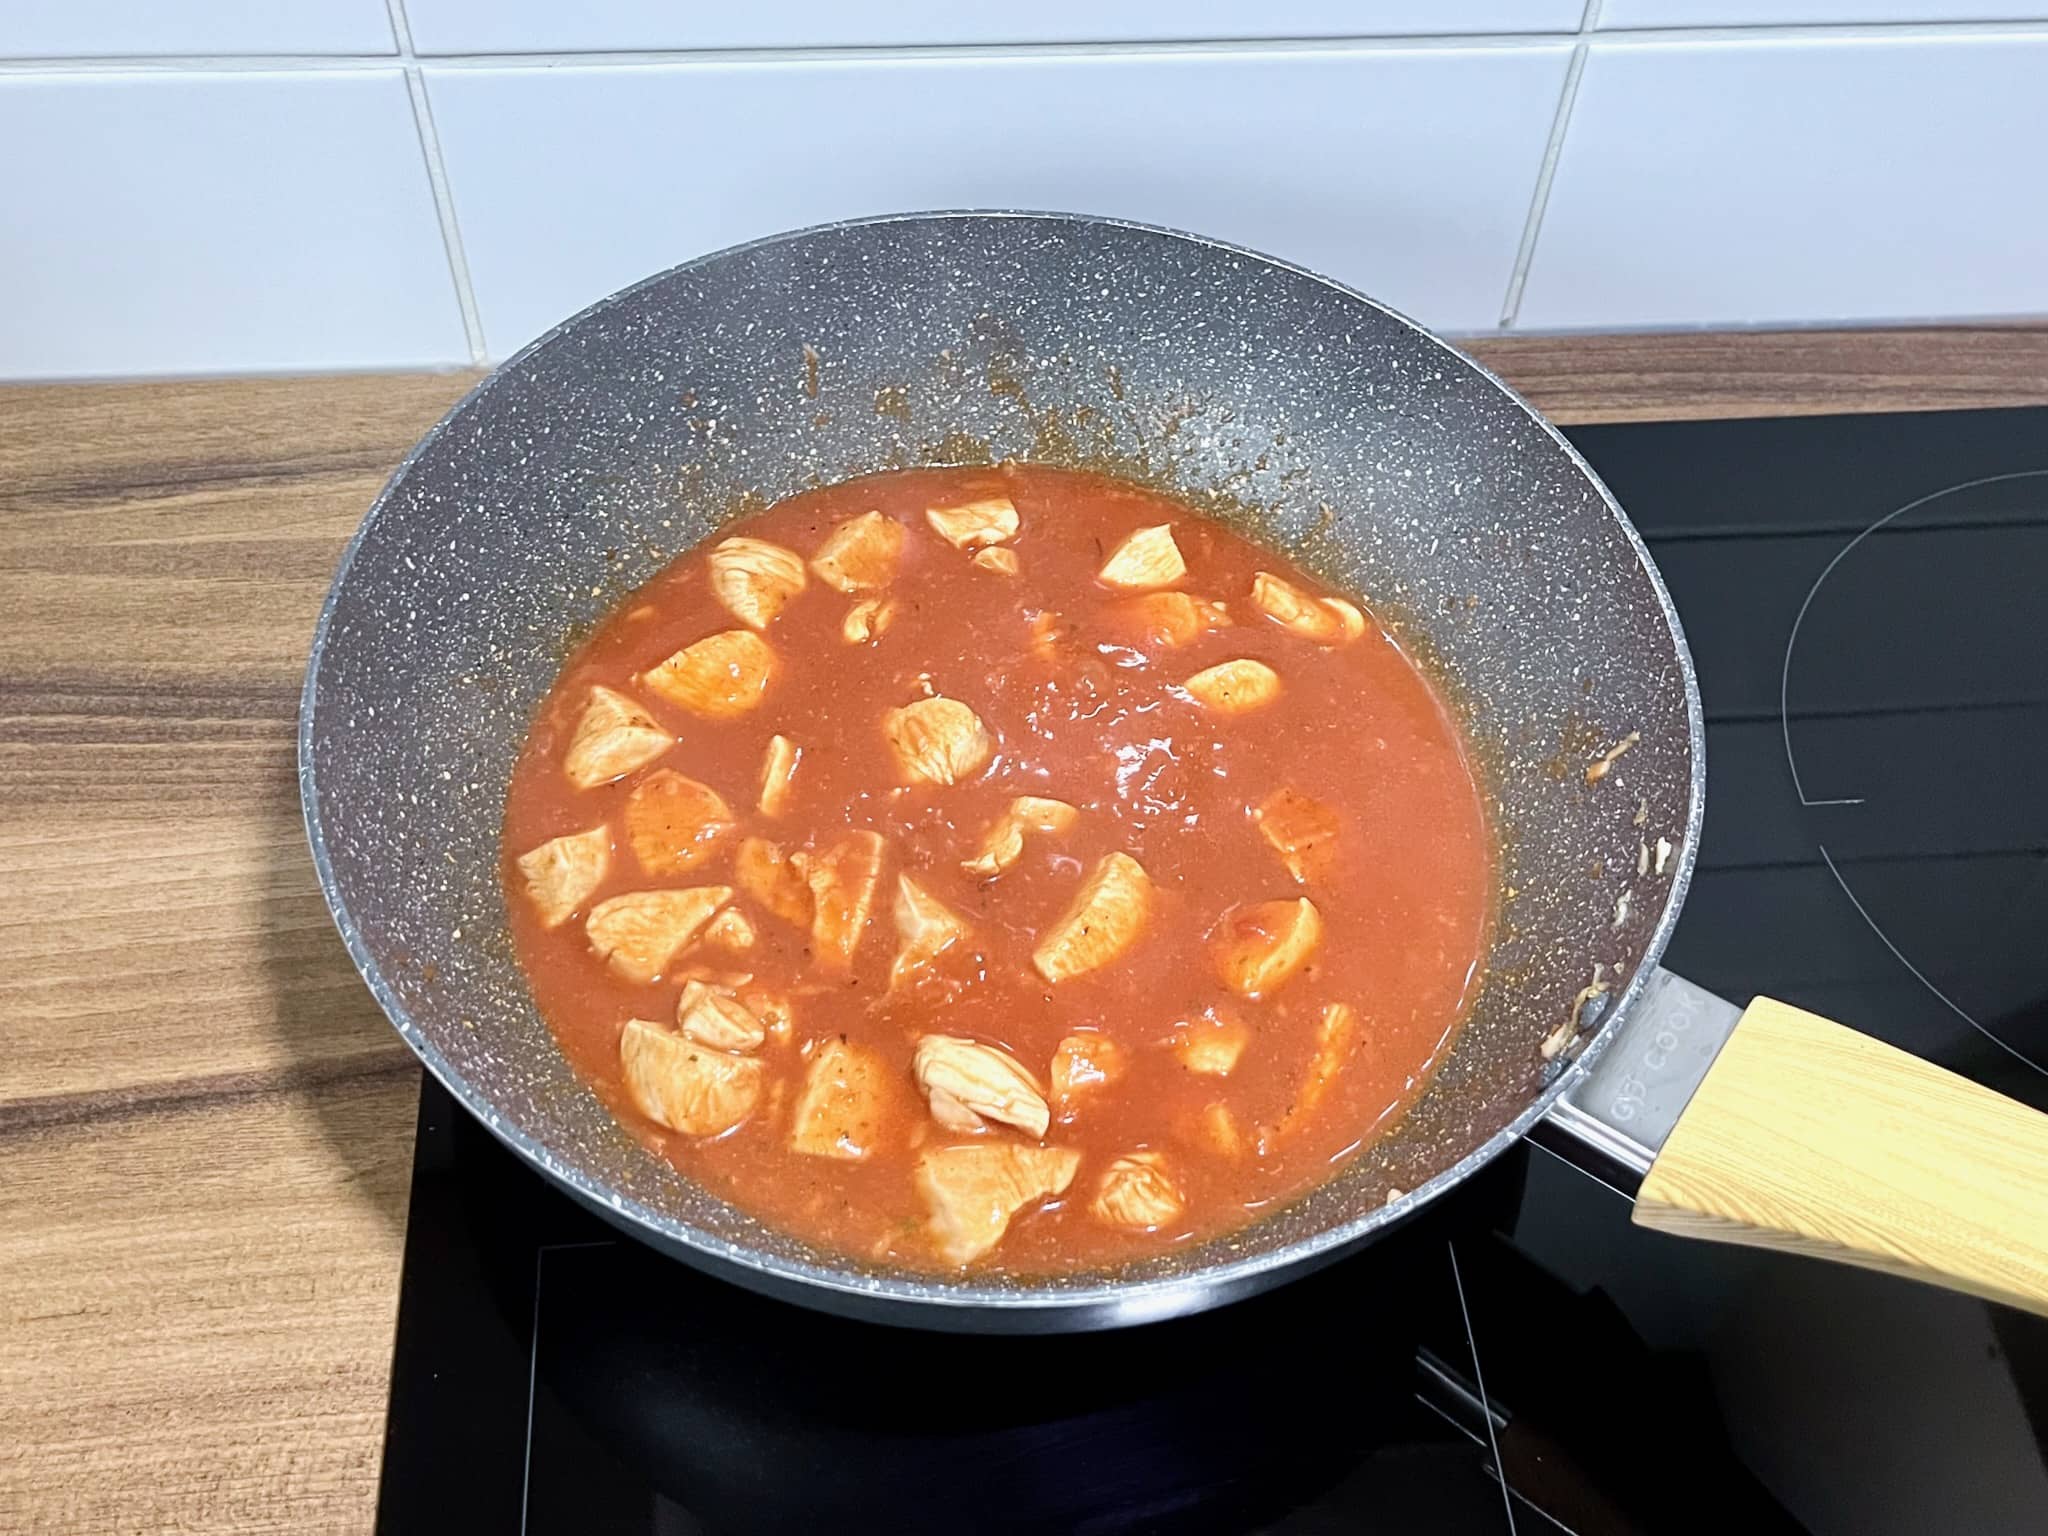 The chicken breasts are nearly ready and still in the pan